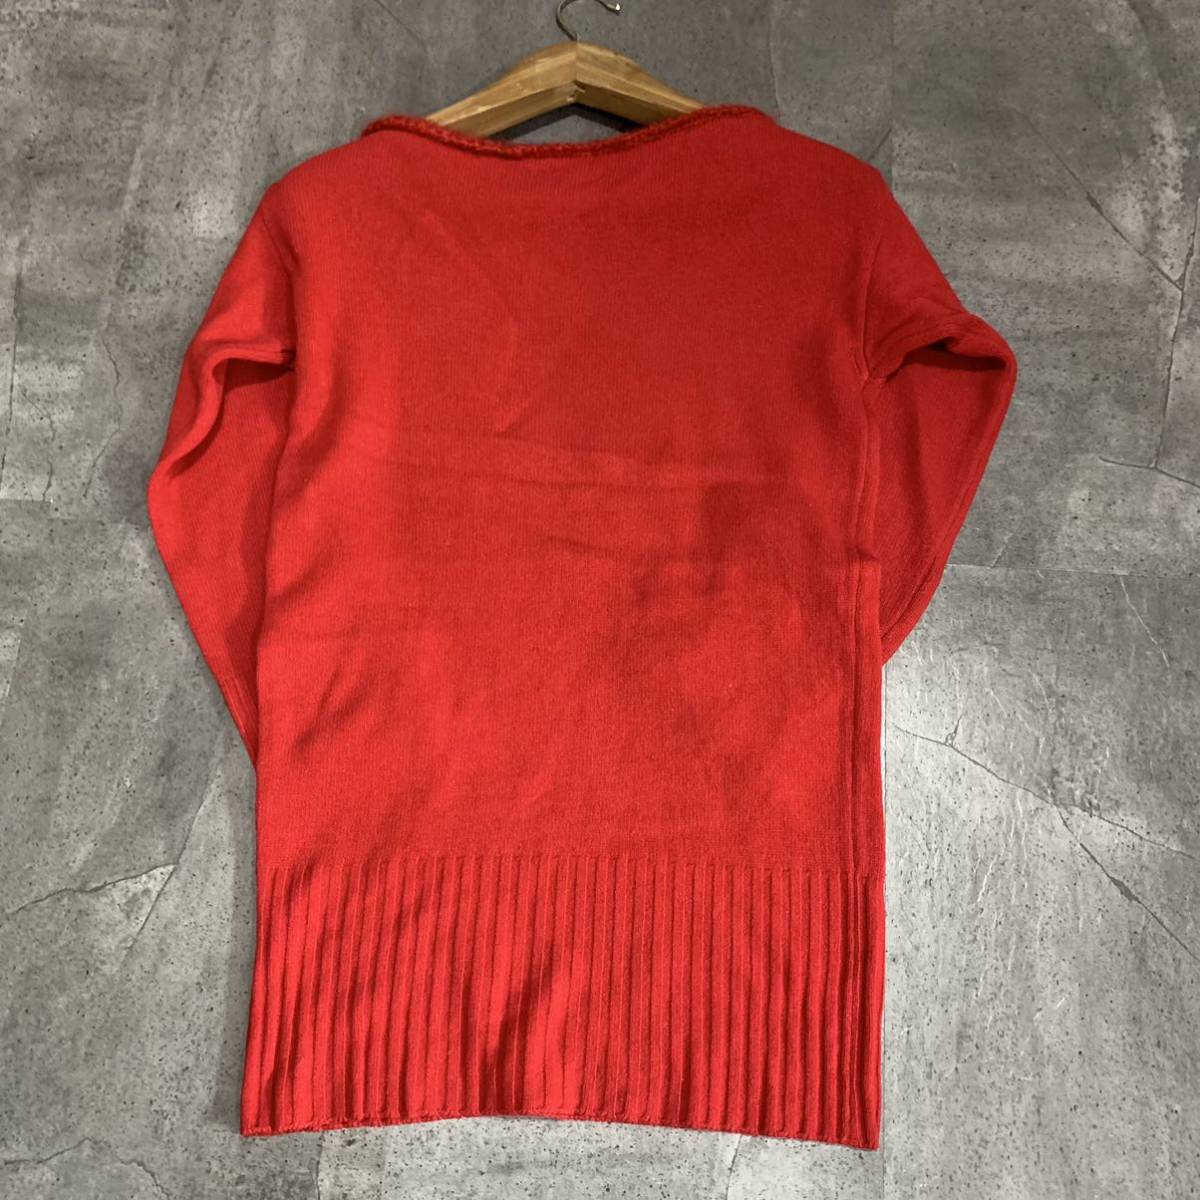 M V refined design!! \' Italy made \' UNITED COLORS OF BENETTON Benetton PURE WOOL long sleeve knitted tunic size:S tops 